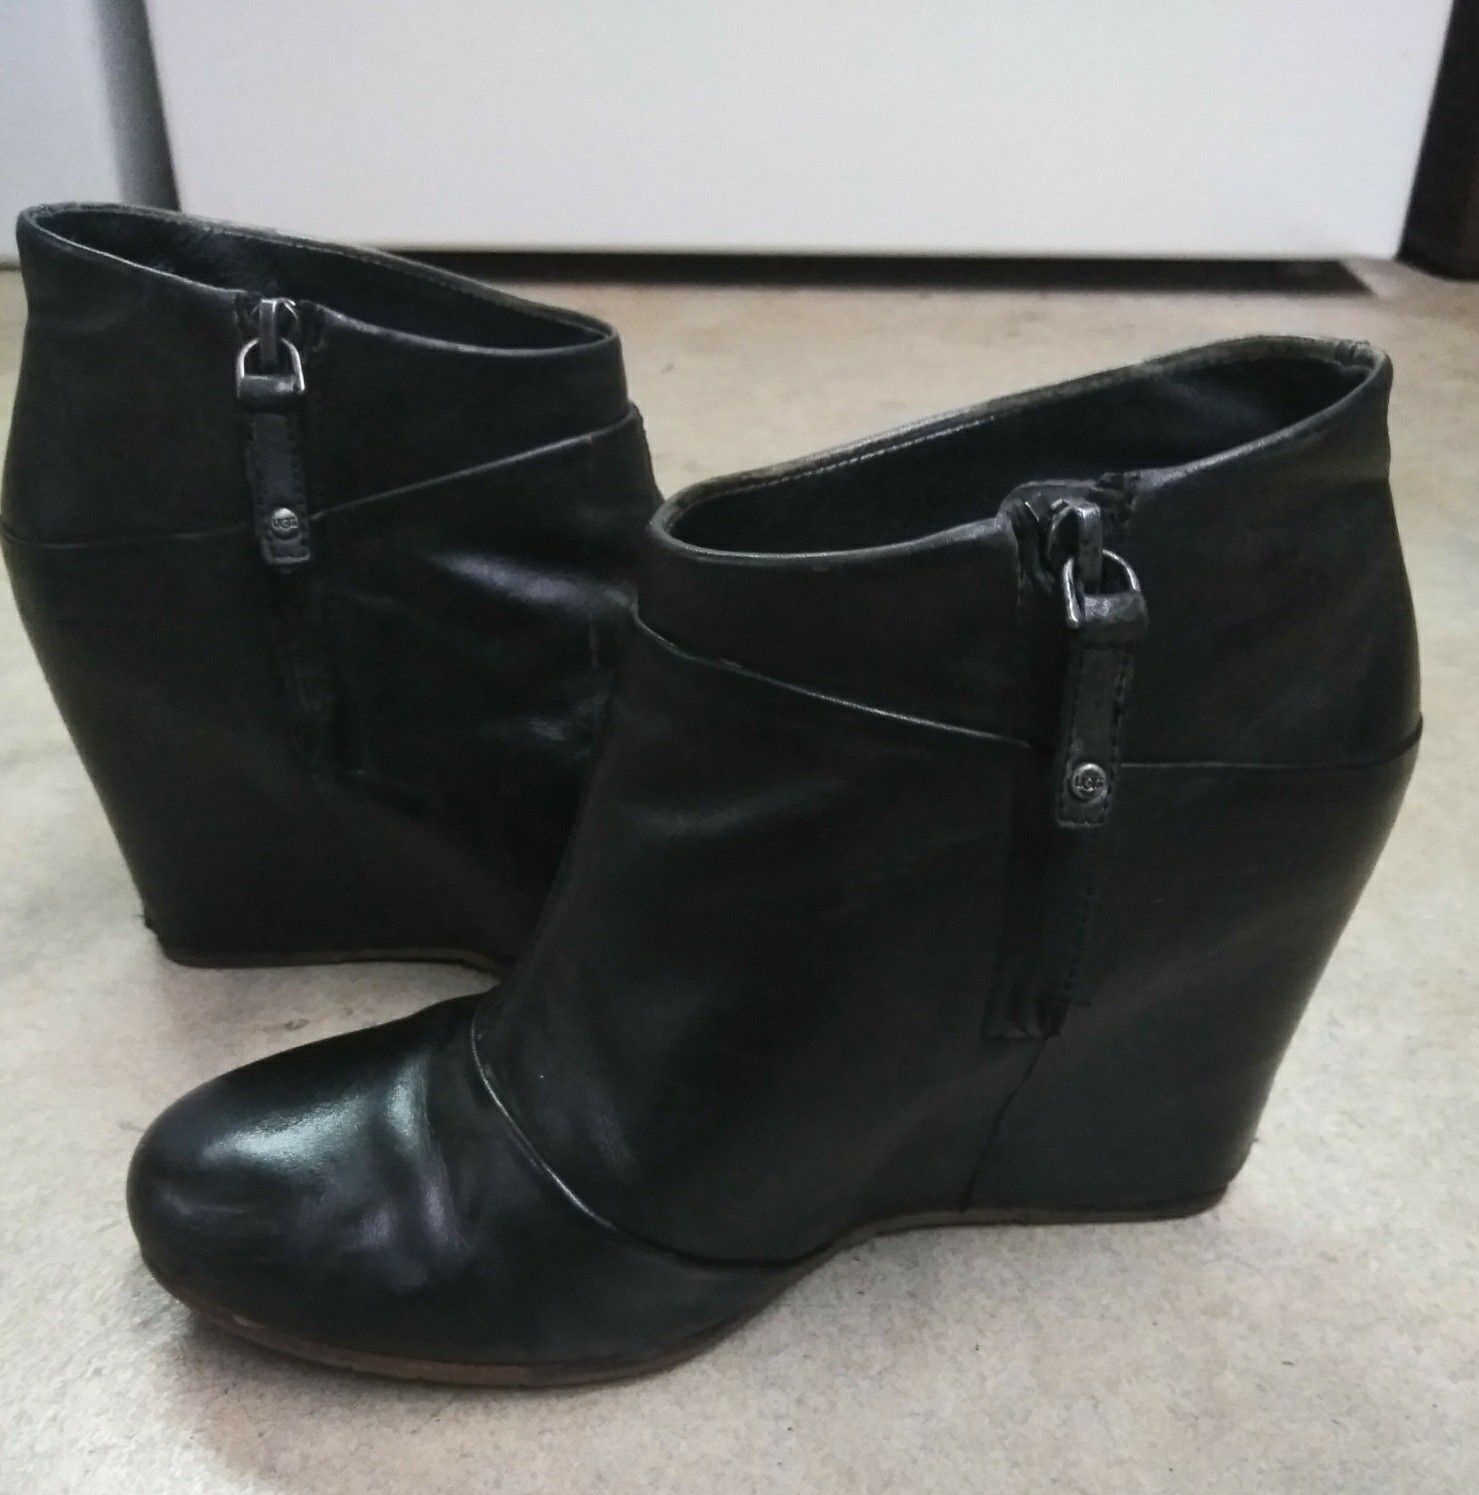 Ugg Black Leather Wedge Ankle Boots Women's 8.5 (39.5) Make Offer